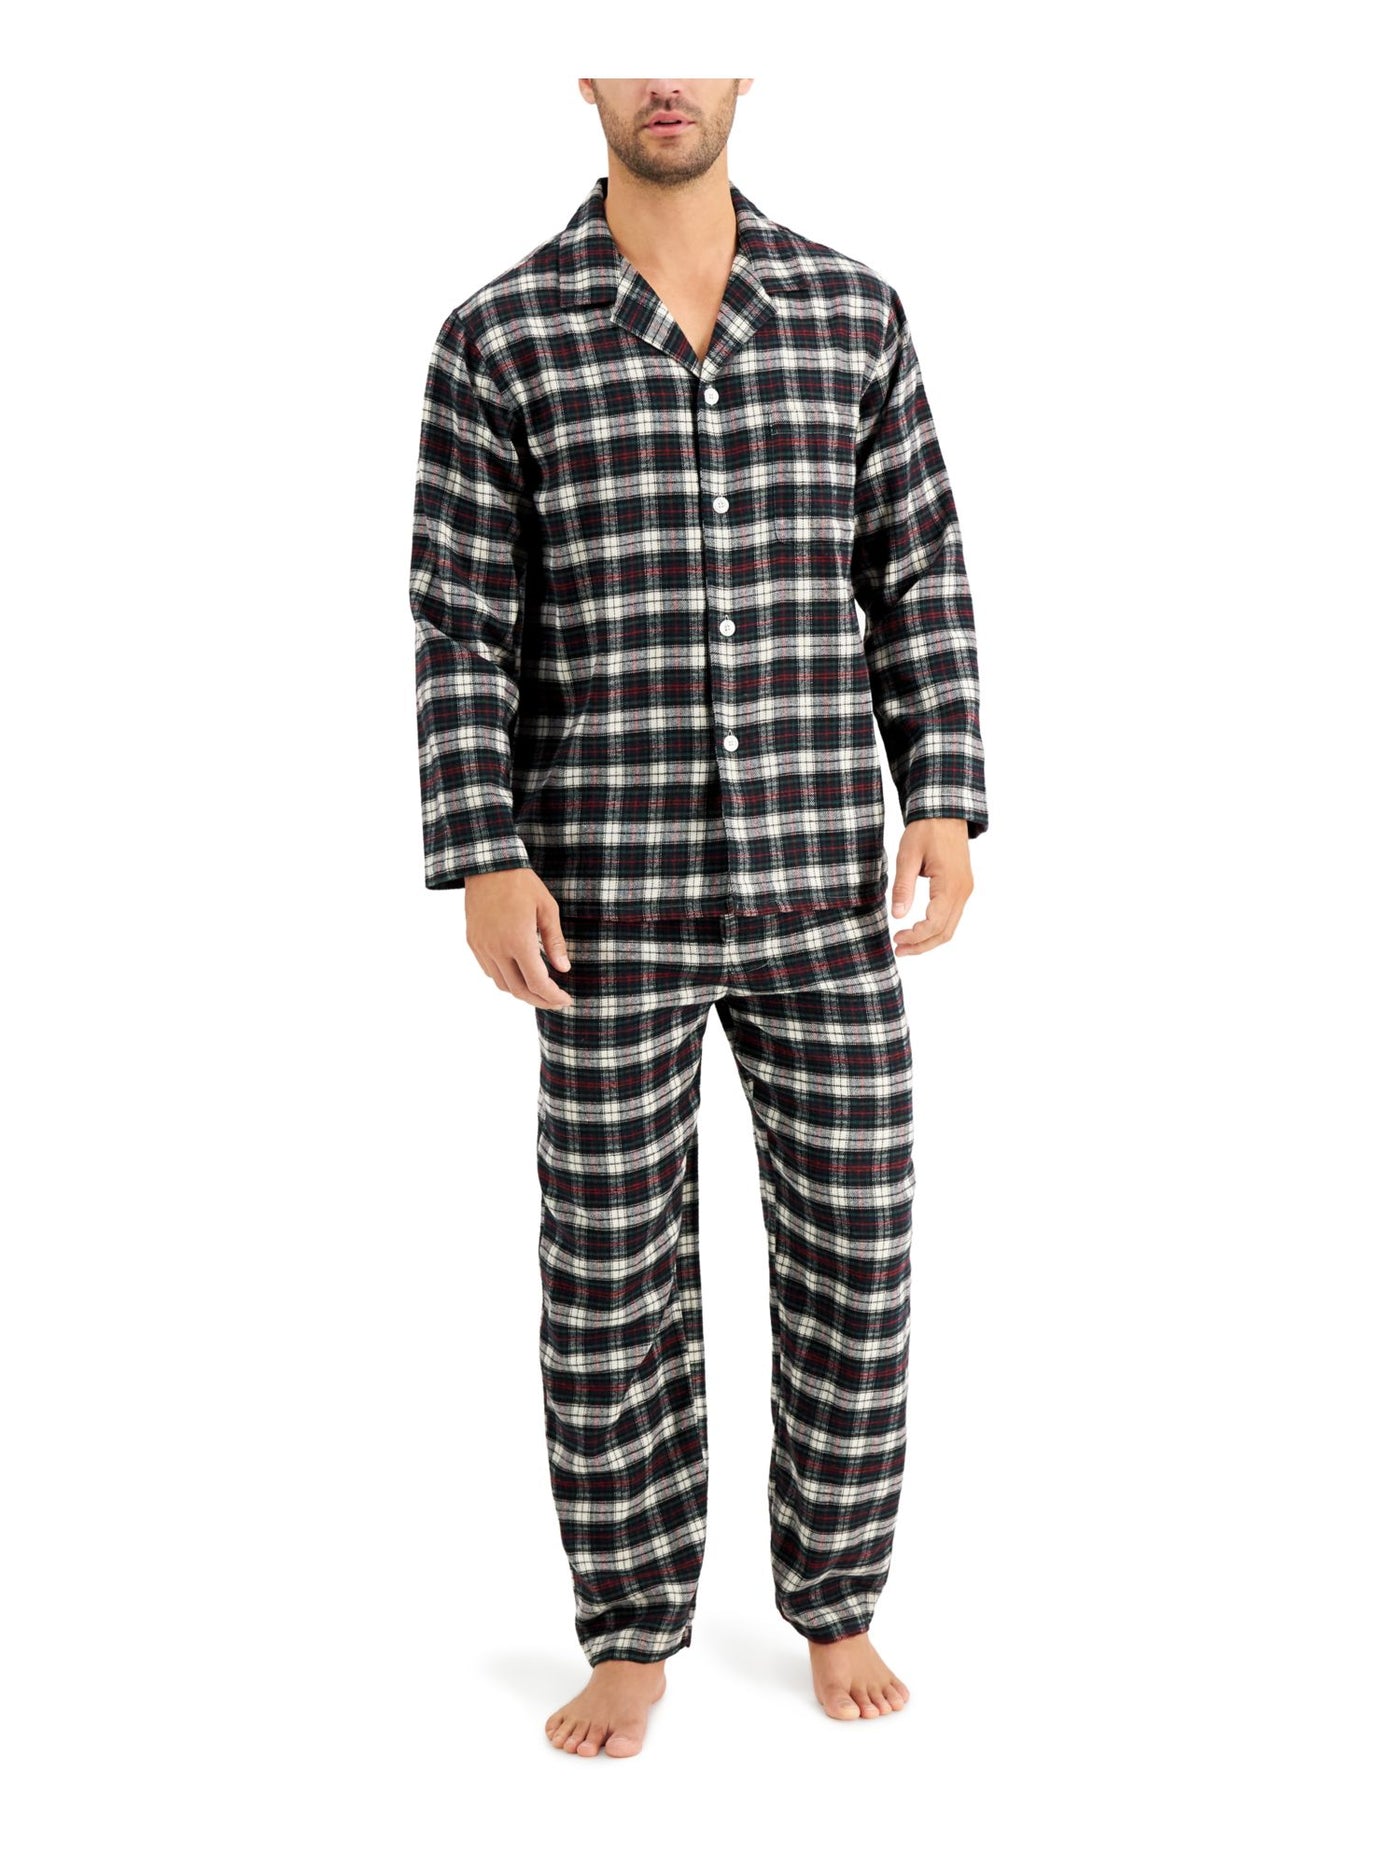 CLUBROOM Mens Green Plaid Pocketed Long Sleeve Button Up Top Straight leg Pants Pajamas XXL